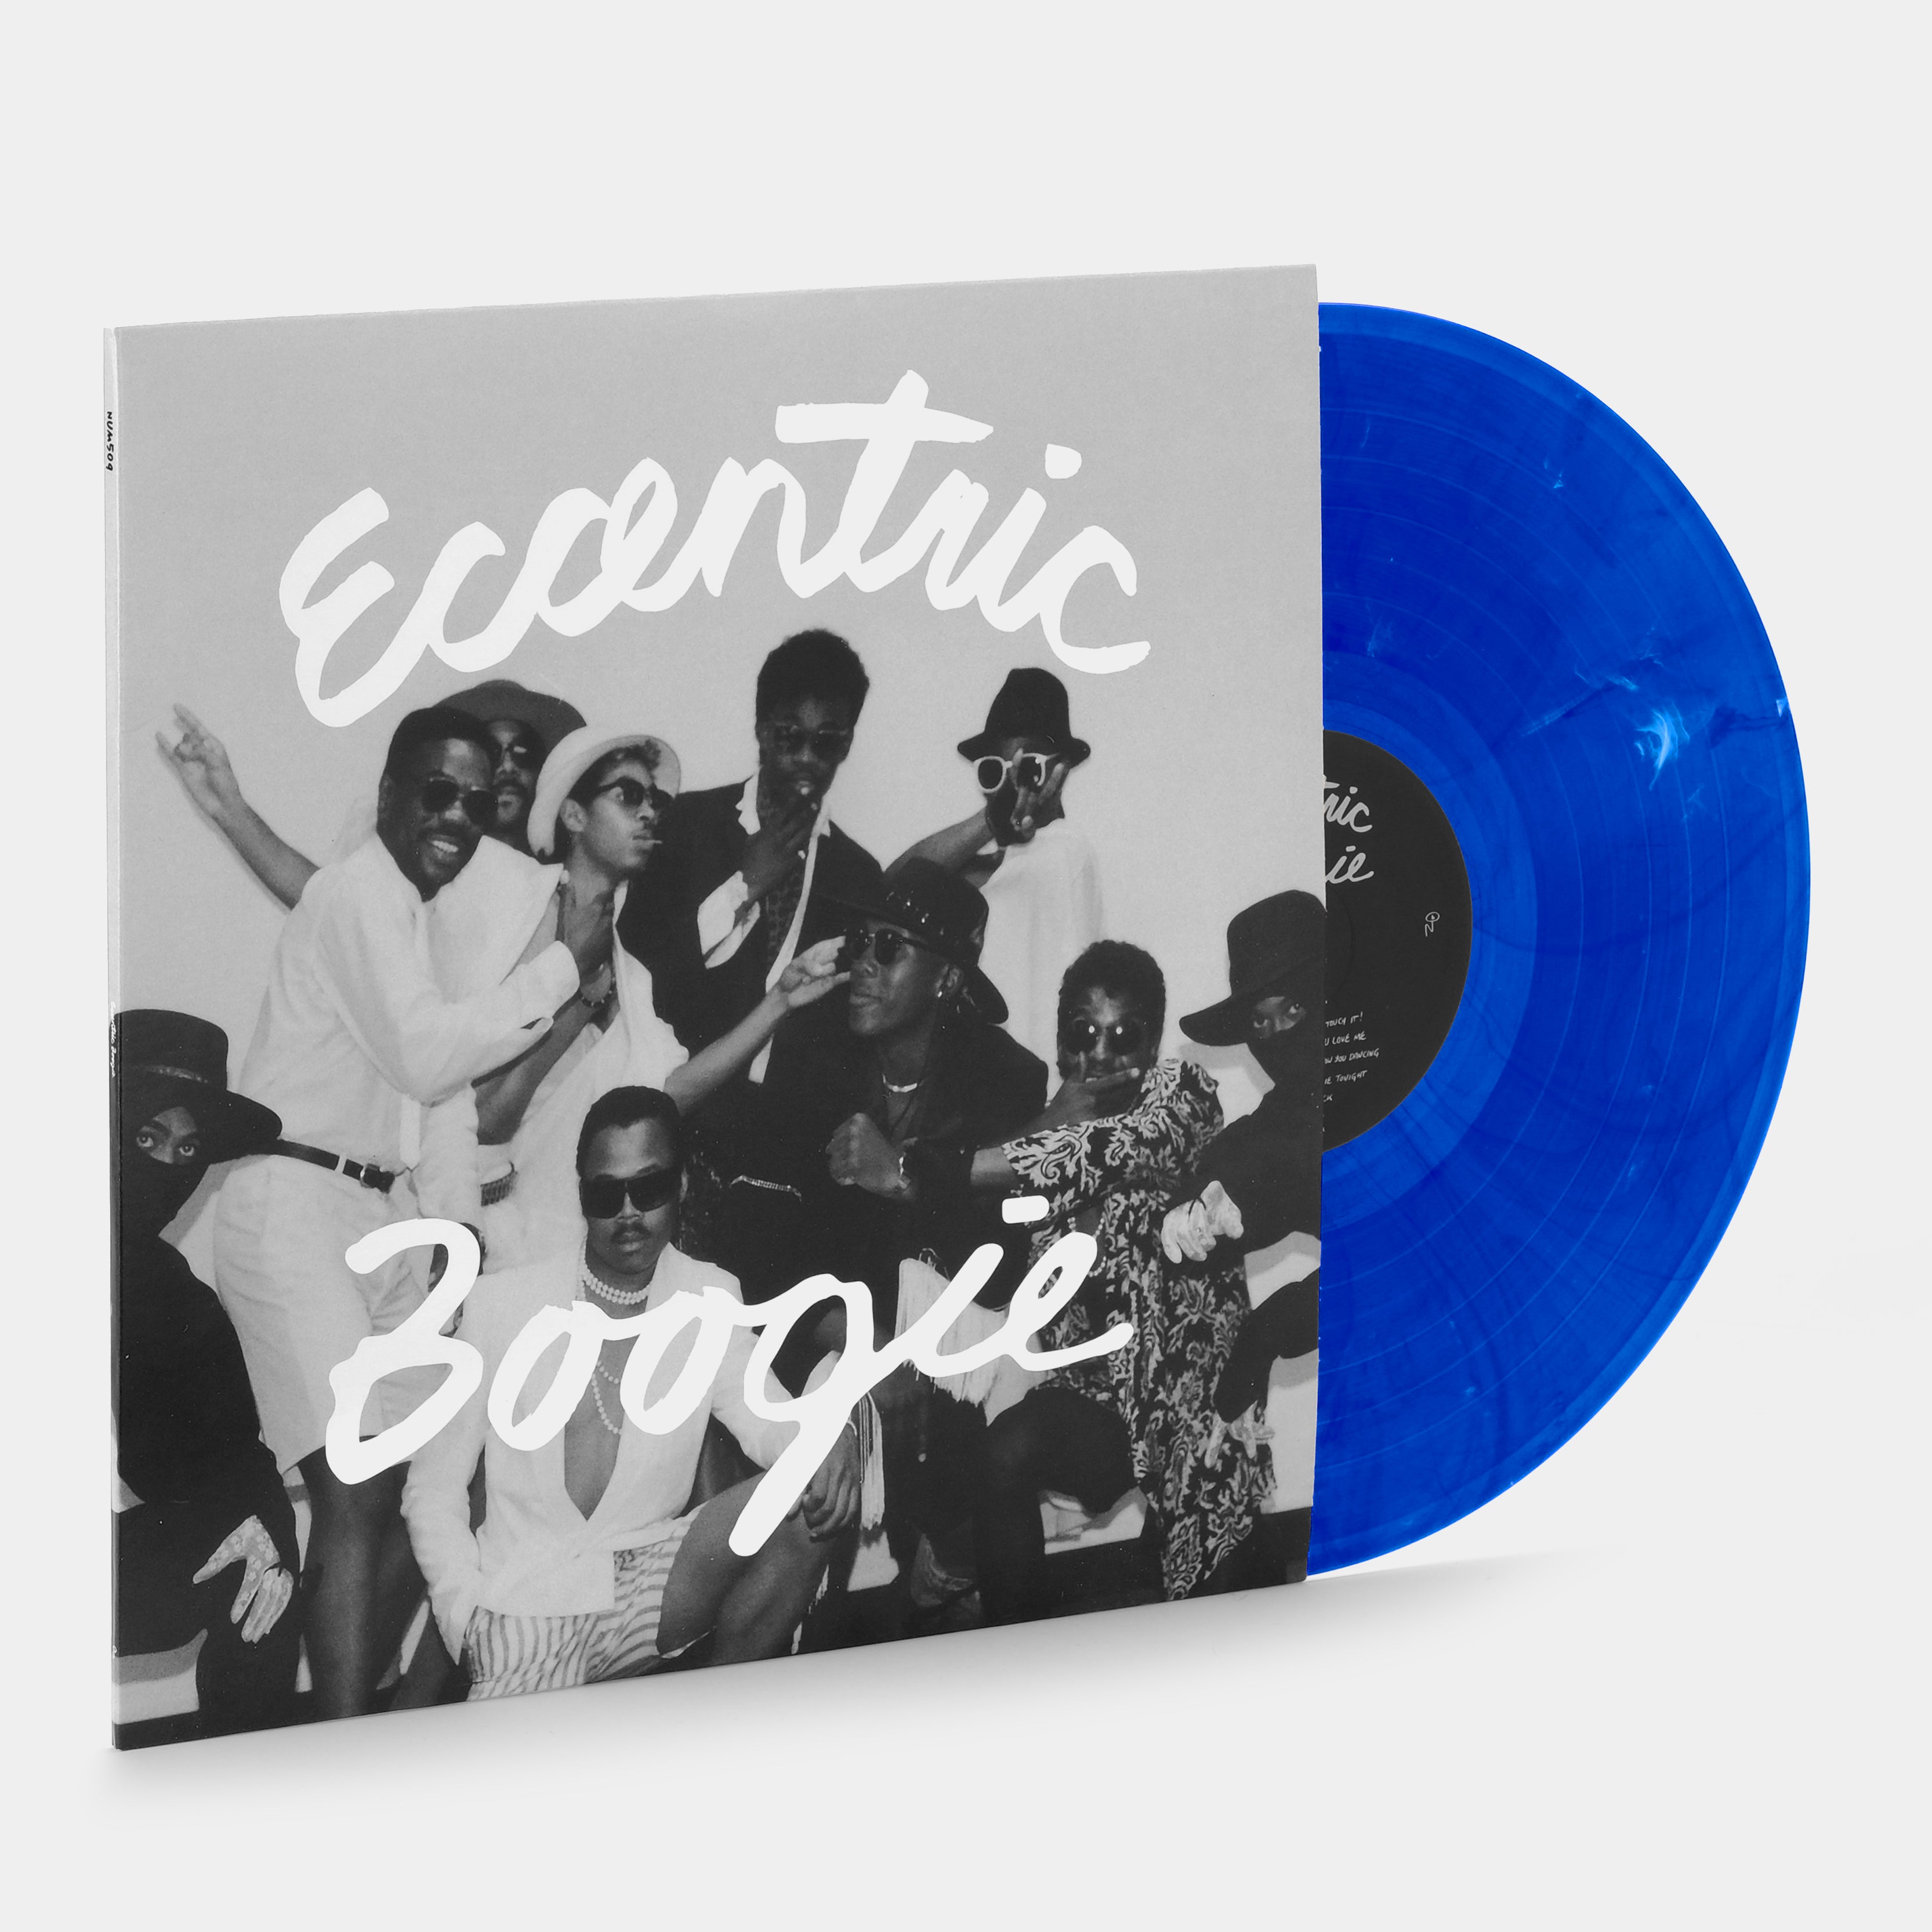 Eccentric Boogie LP Frosted Blue Vinyl Record